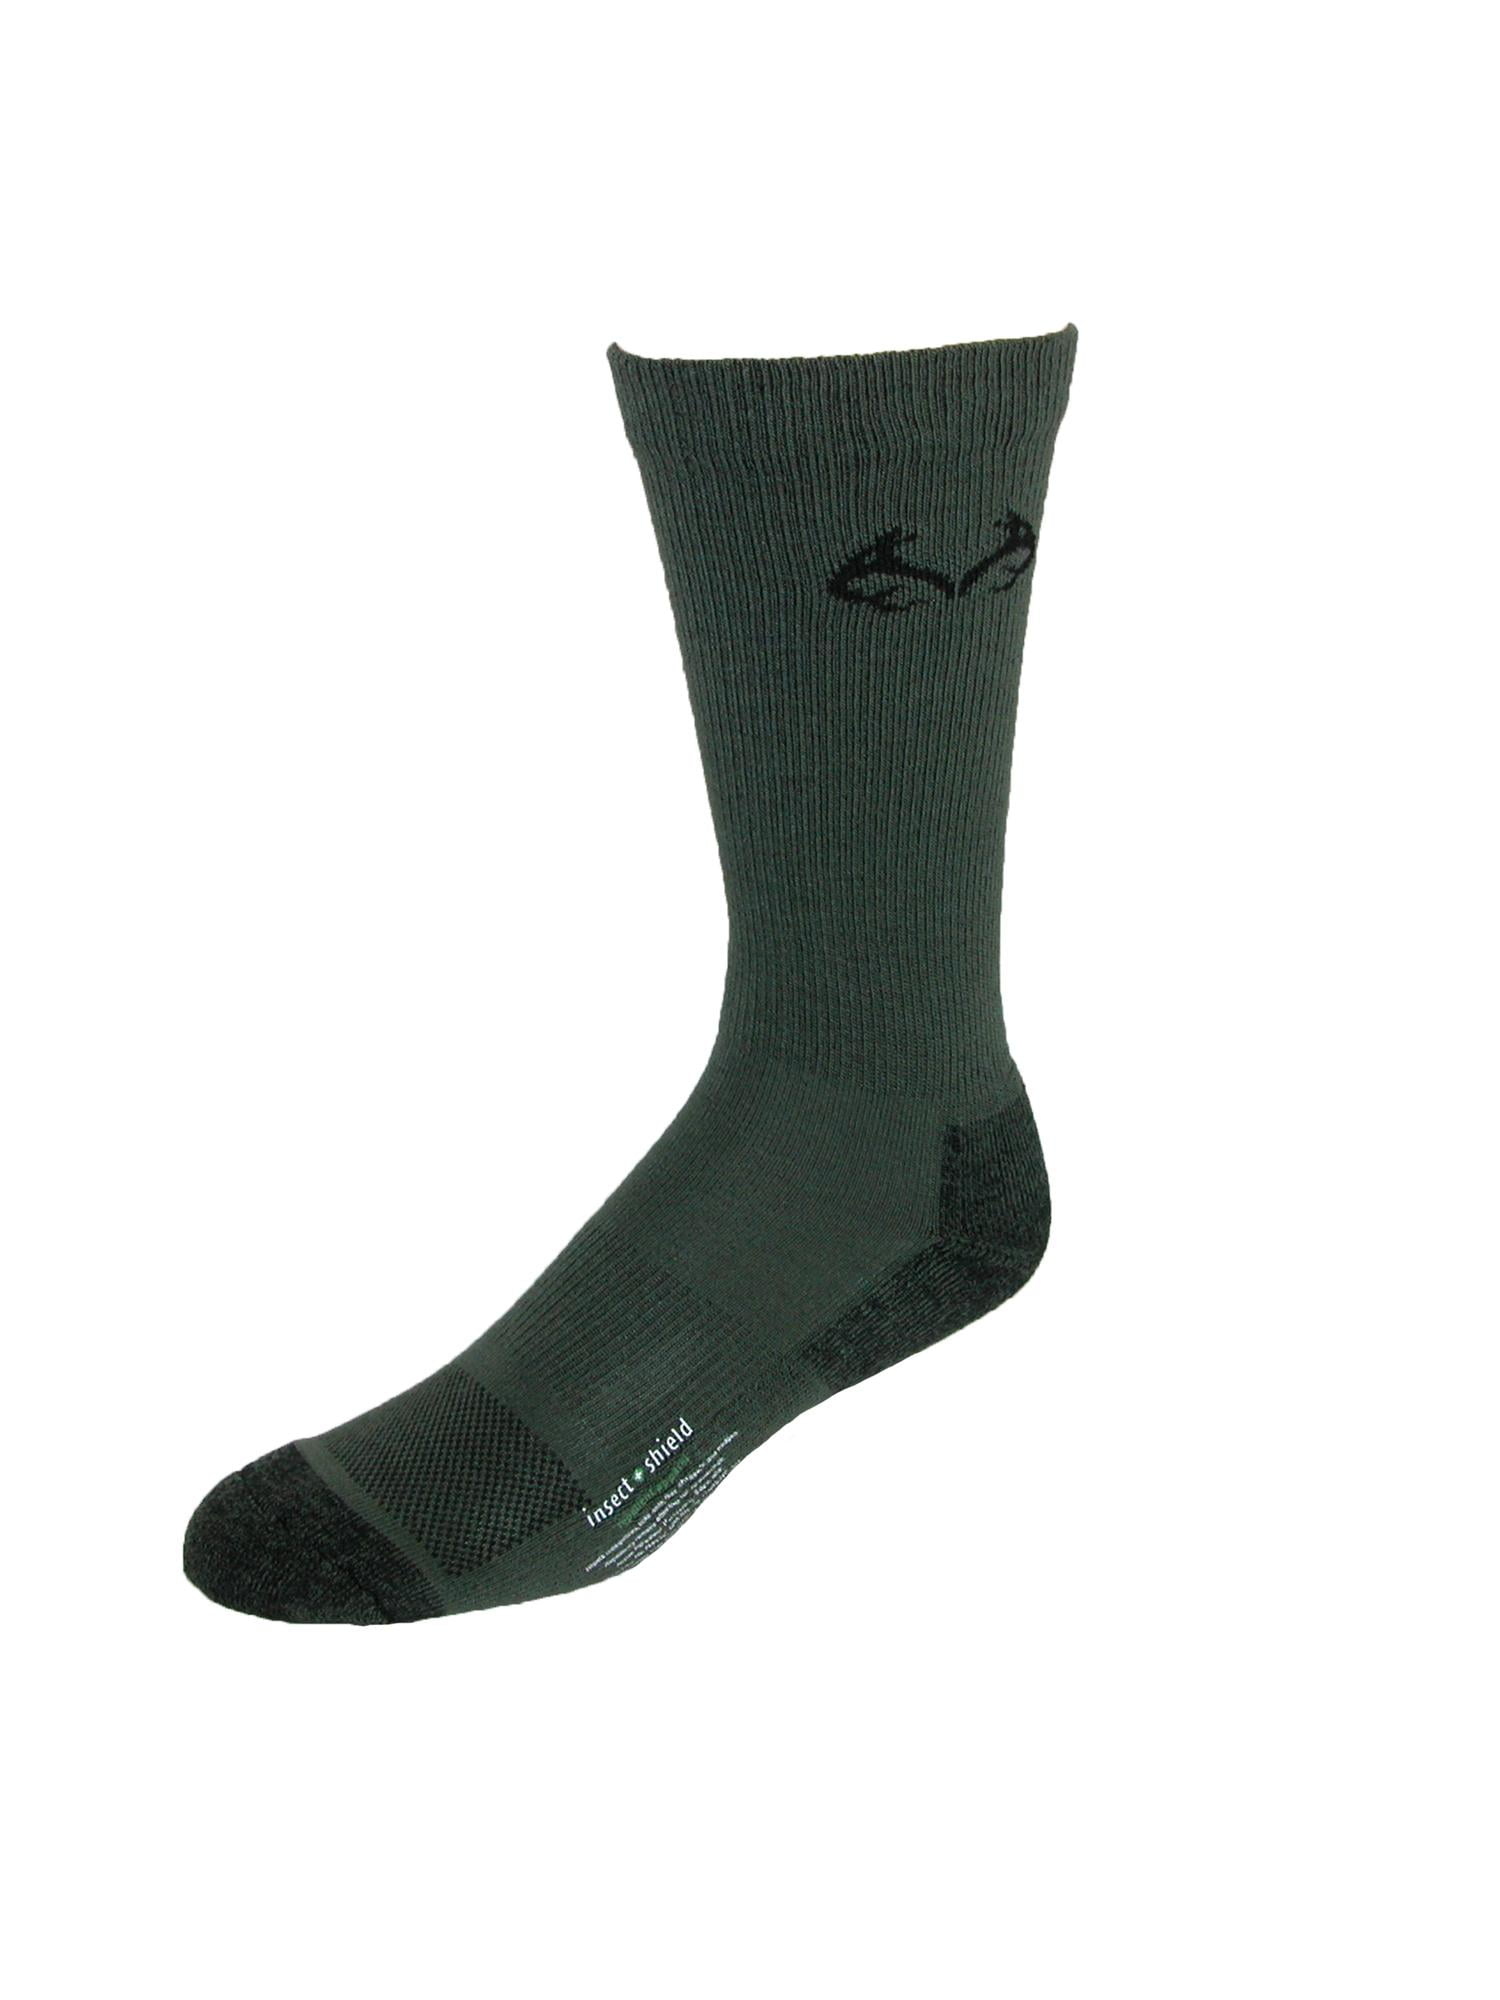 REALTREE Insect Adult Shield Crew Socks 